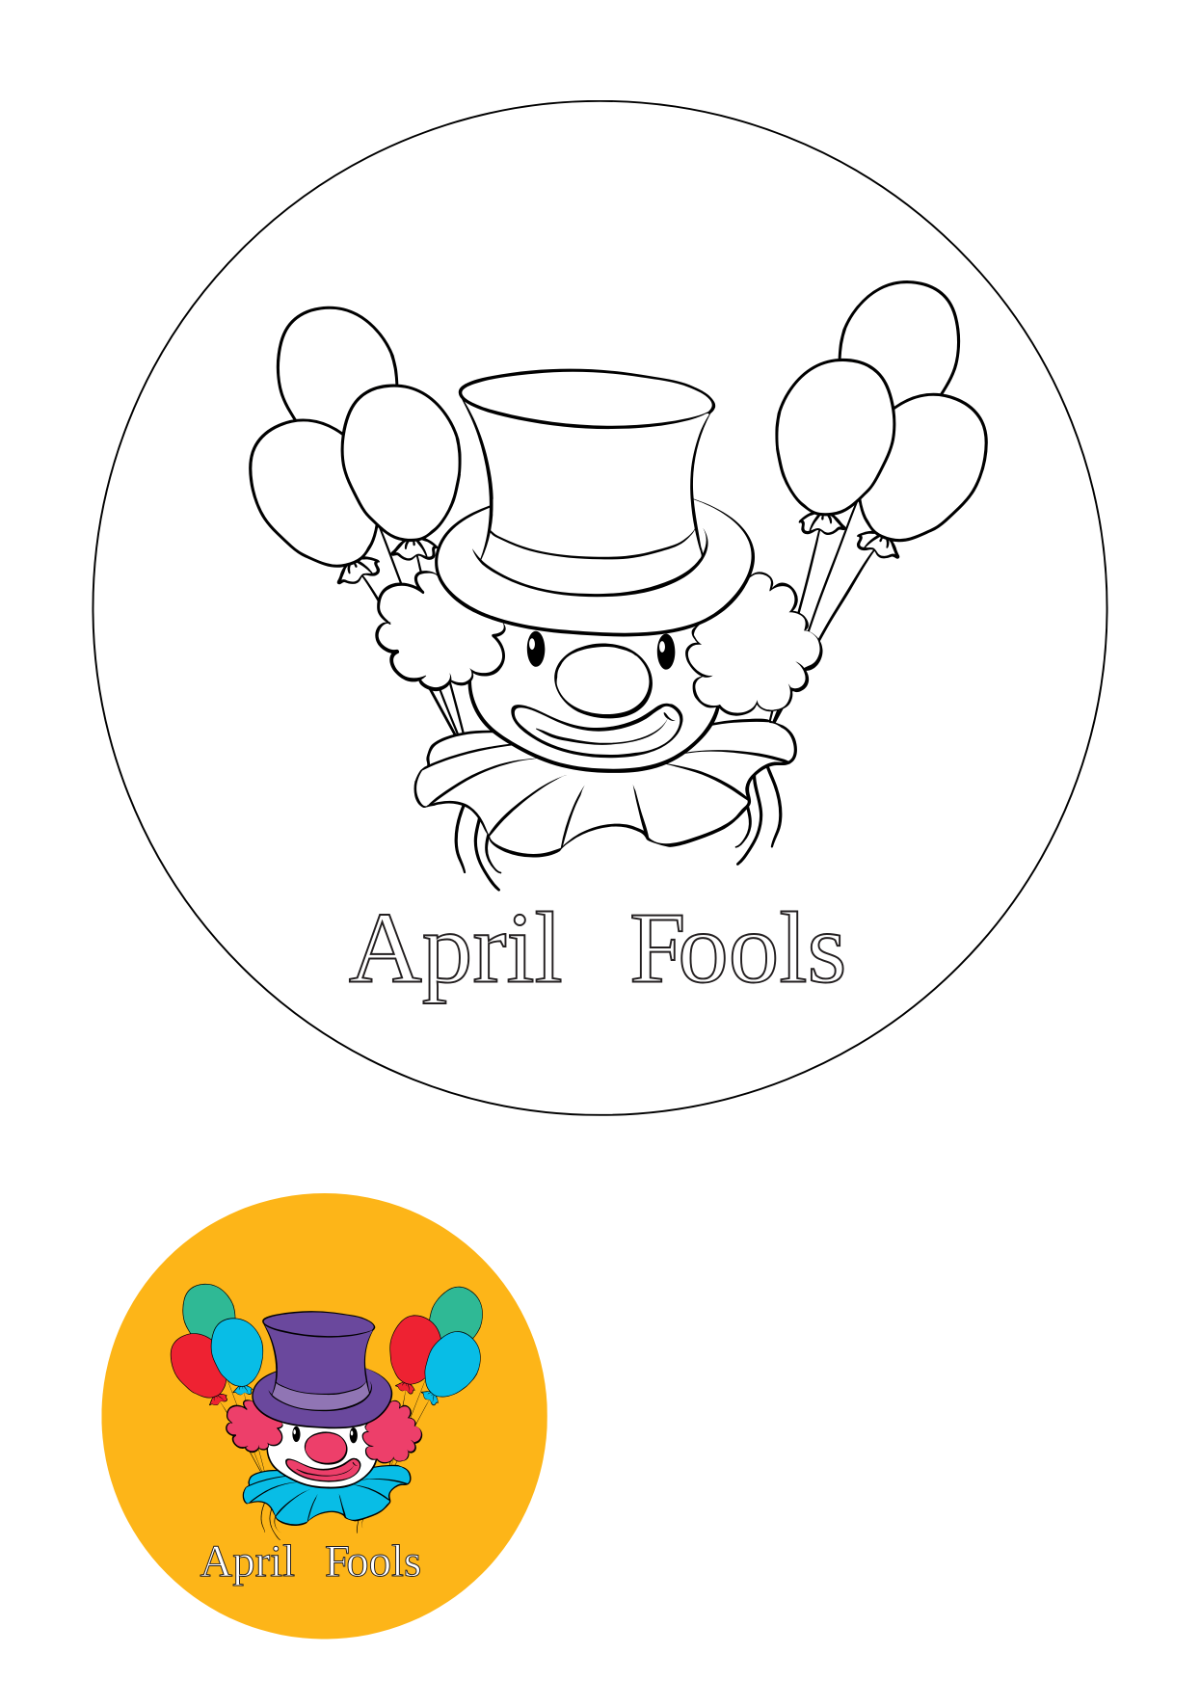 April Fools’ Day Coloring Page for kids